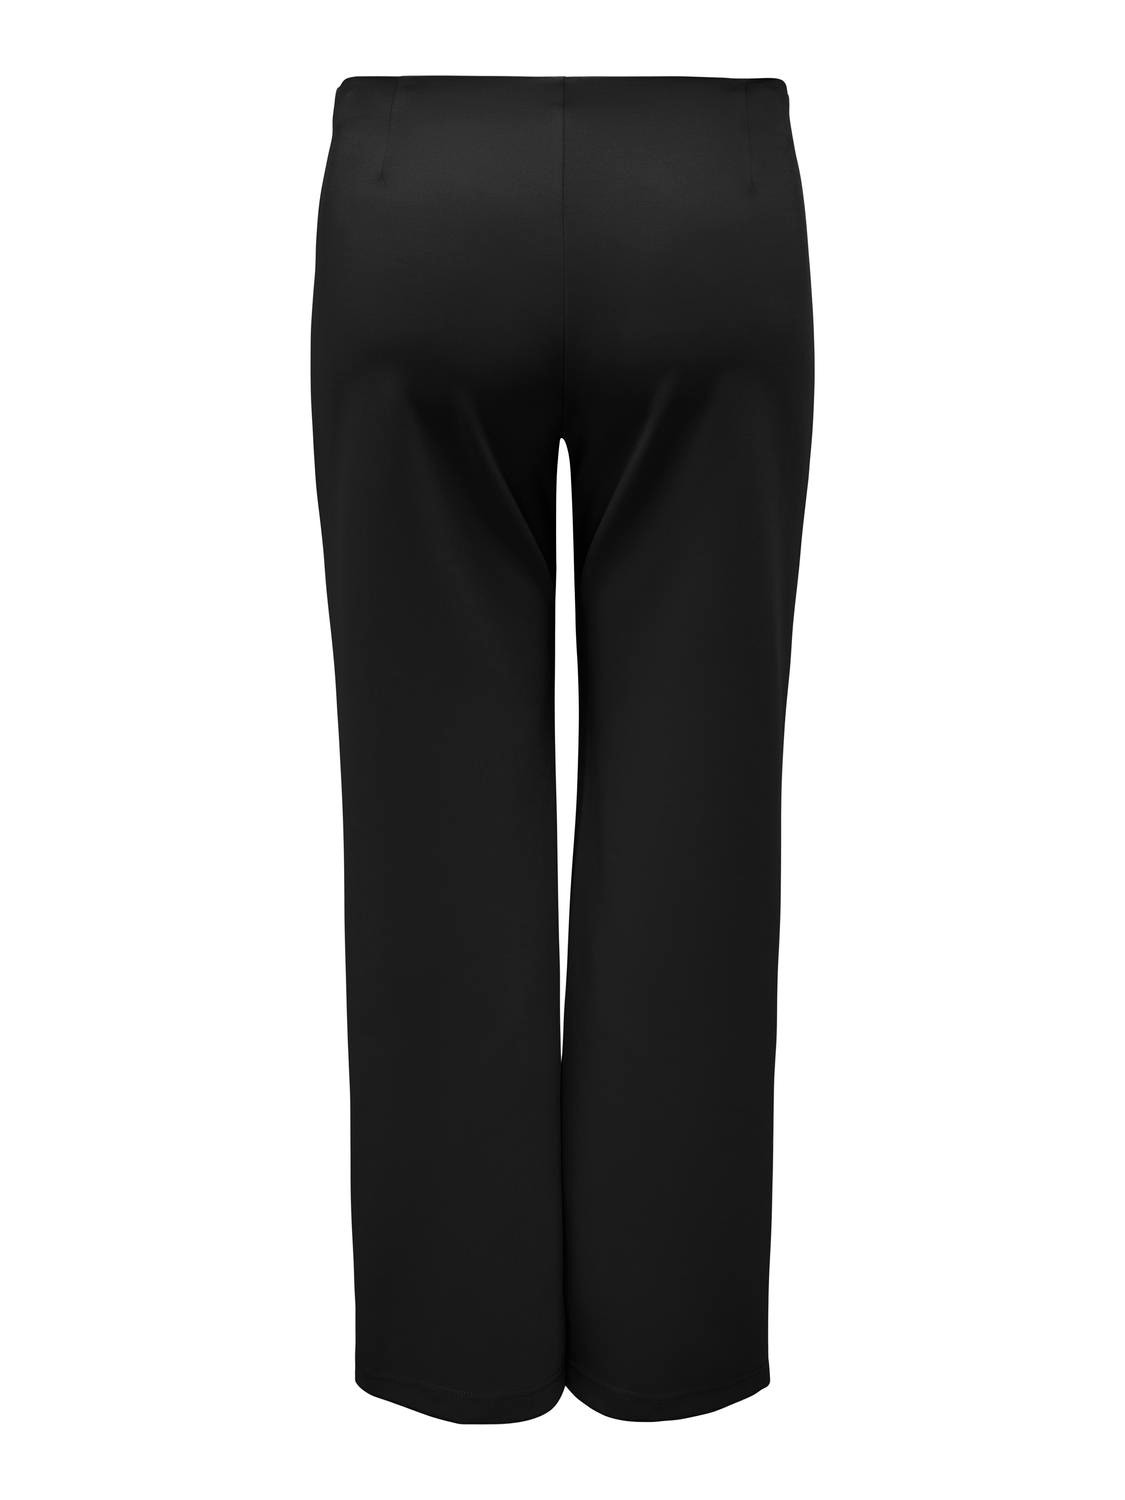 ONLY Curvy trousers with high waist -Black - 15312009